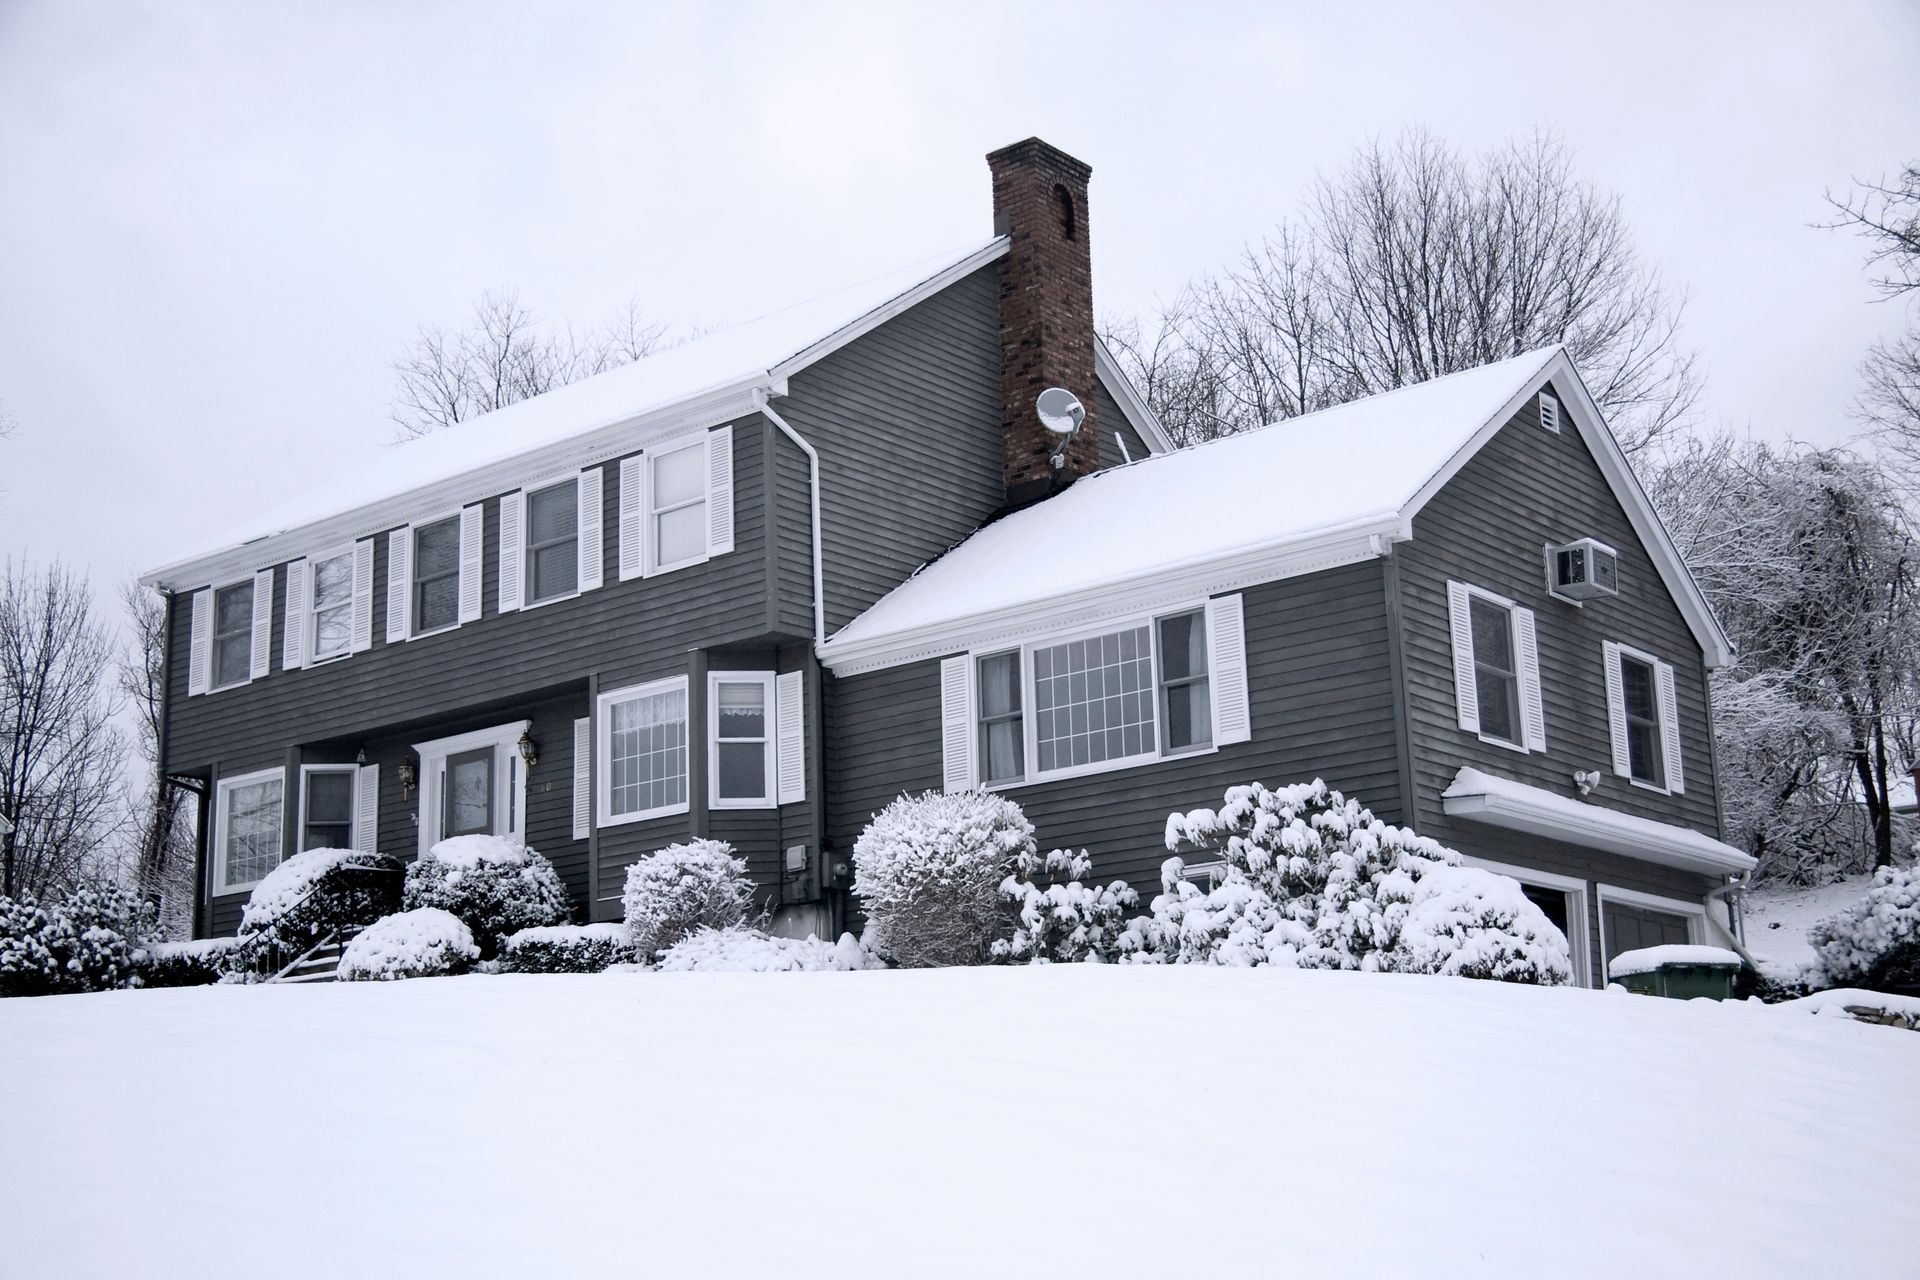 roofing issues for homeowners in Western Massachusetts and the Pioneer Valley